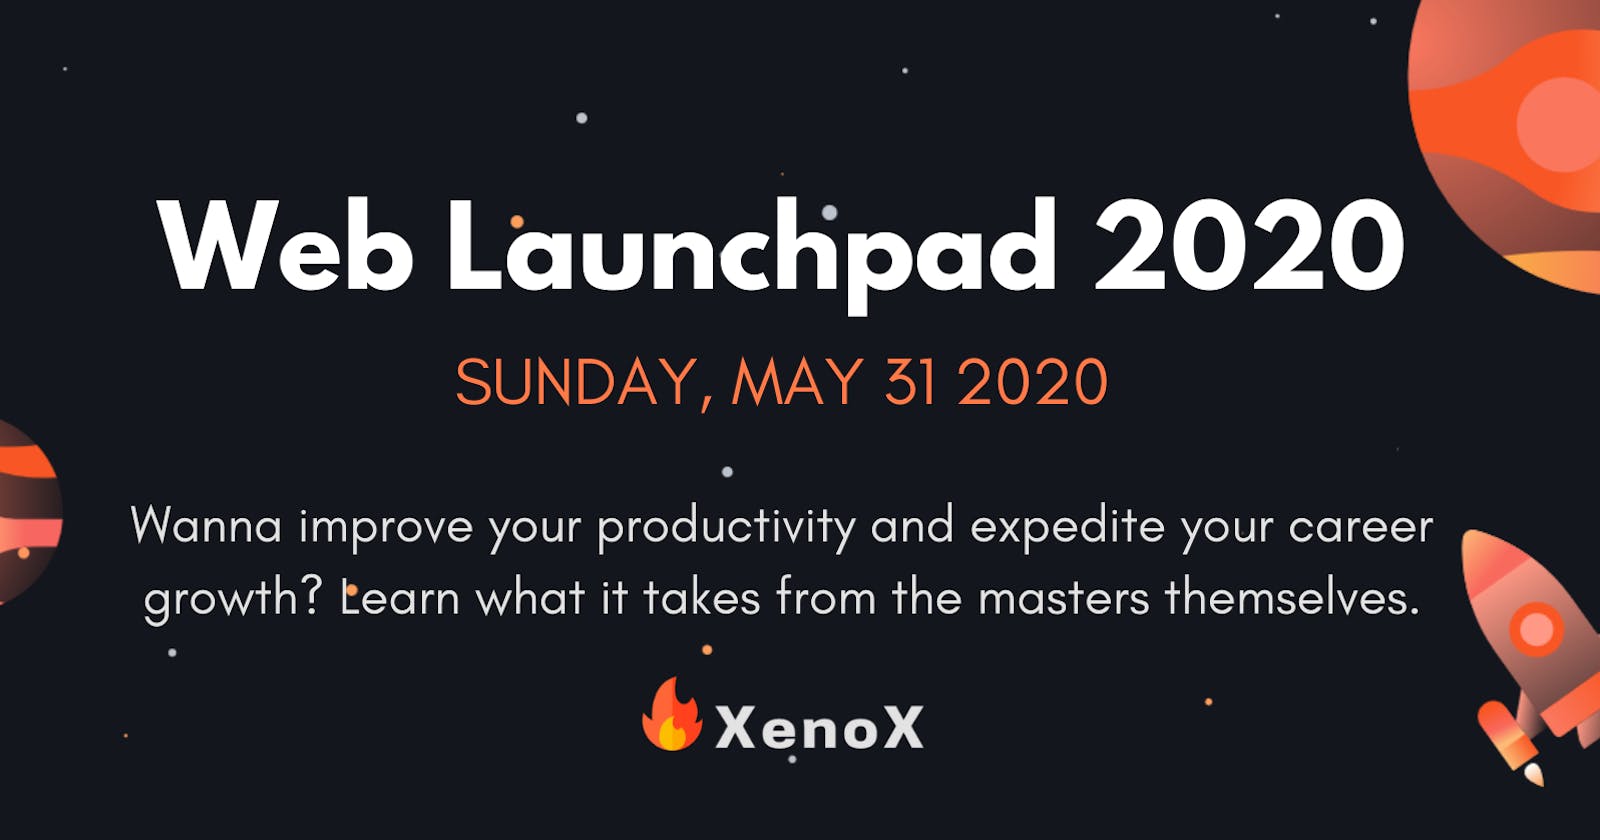 Announcing Web Launchpad 2020 by Team Xenox! 🔥💻👩🏽‍🏫